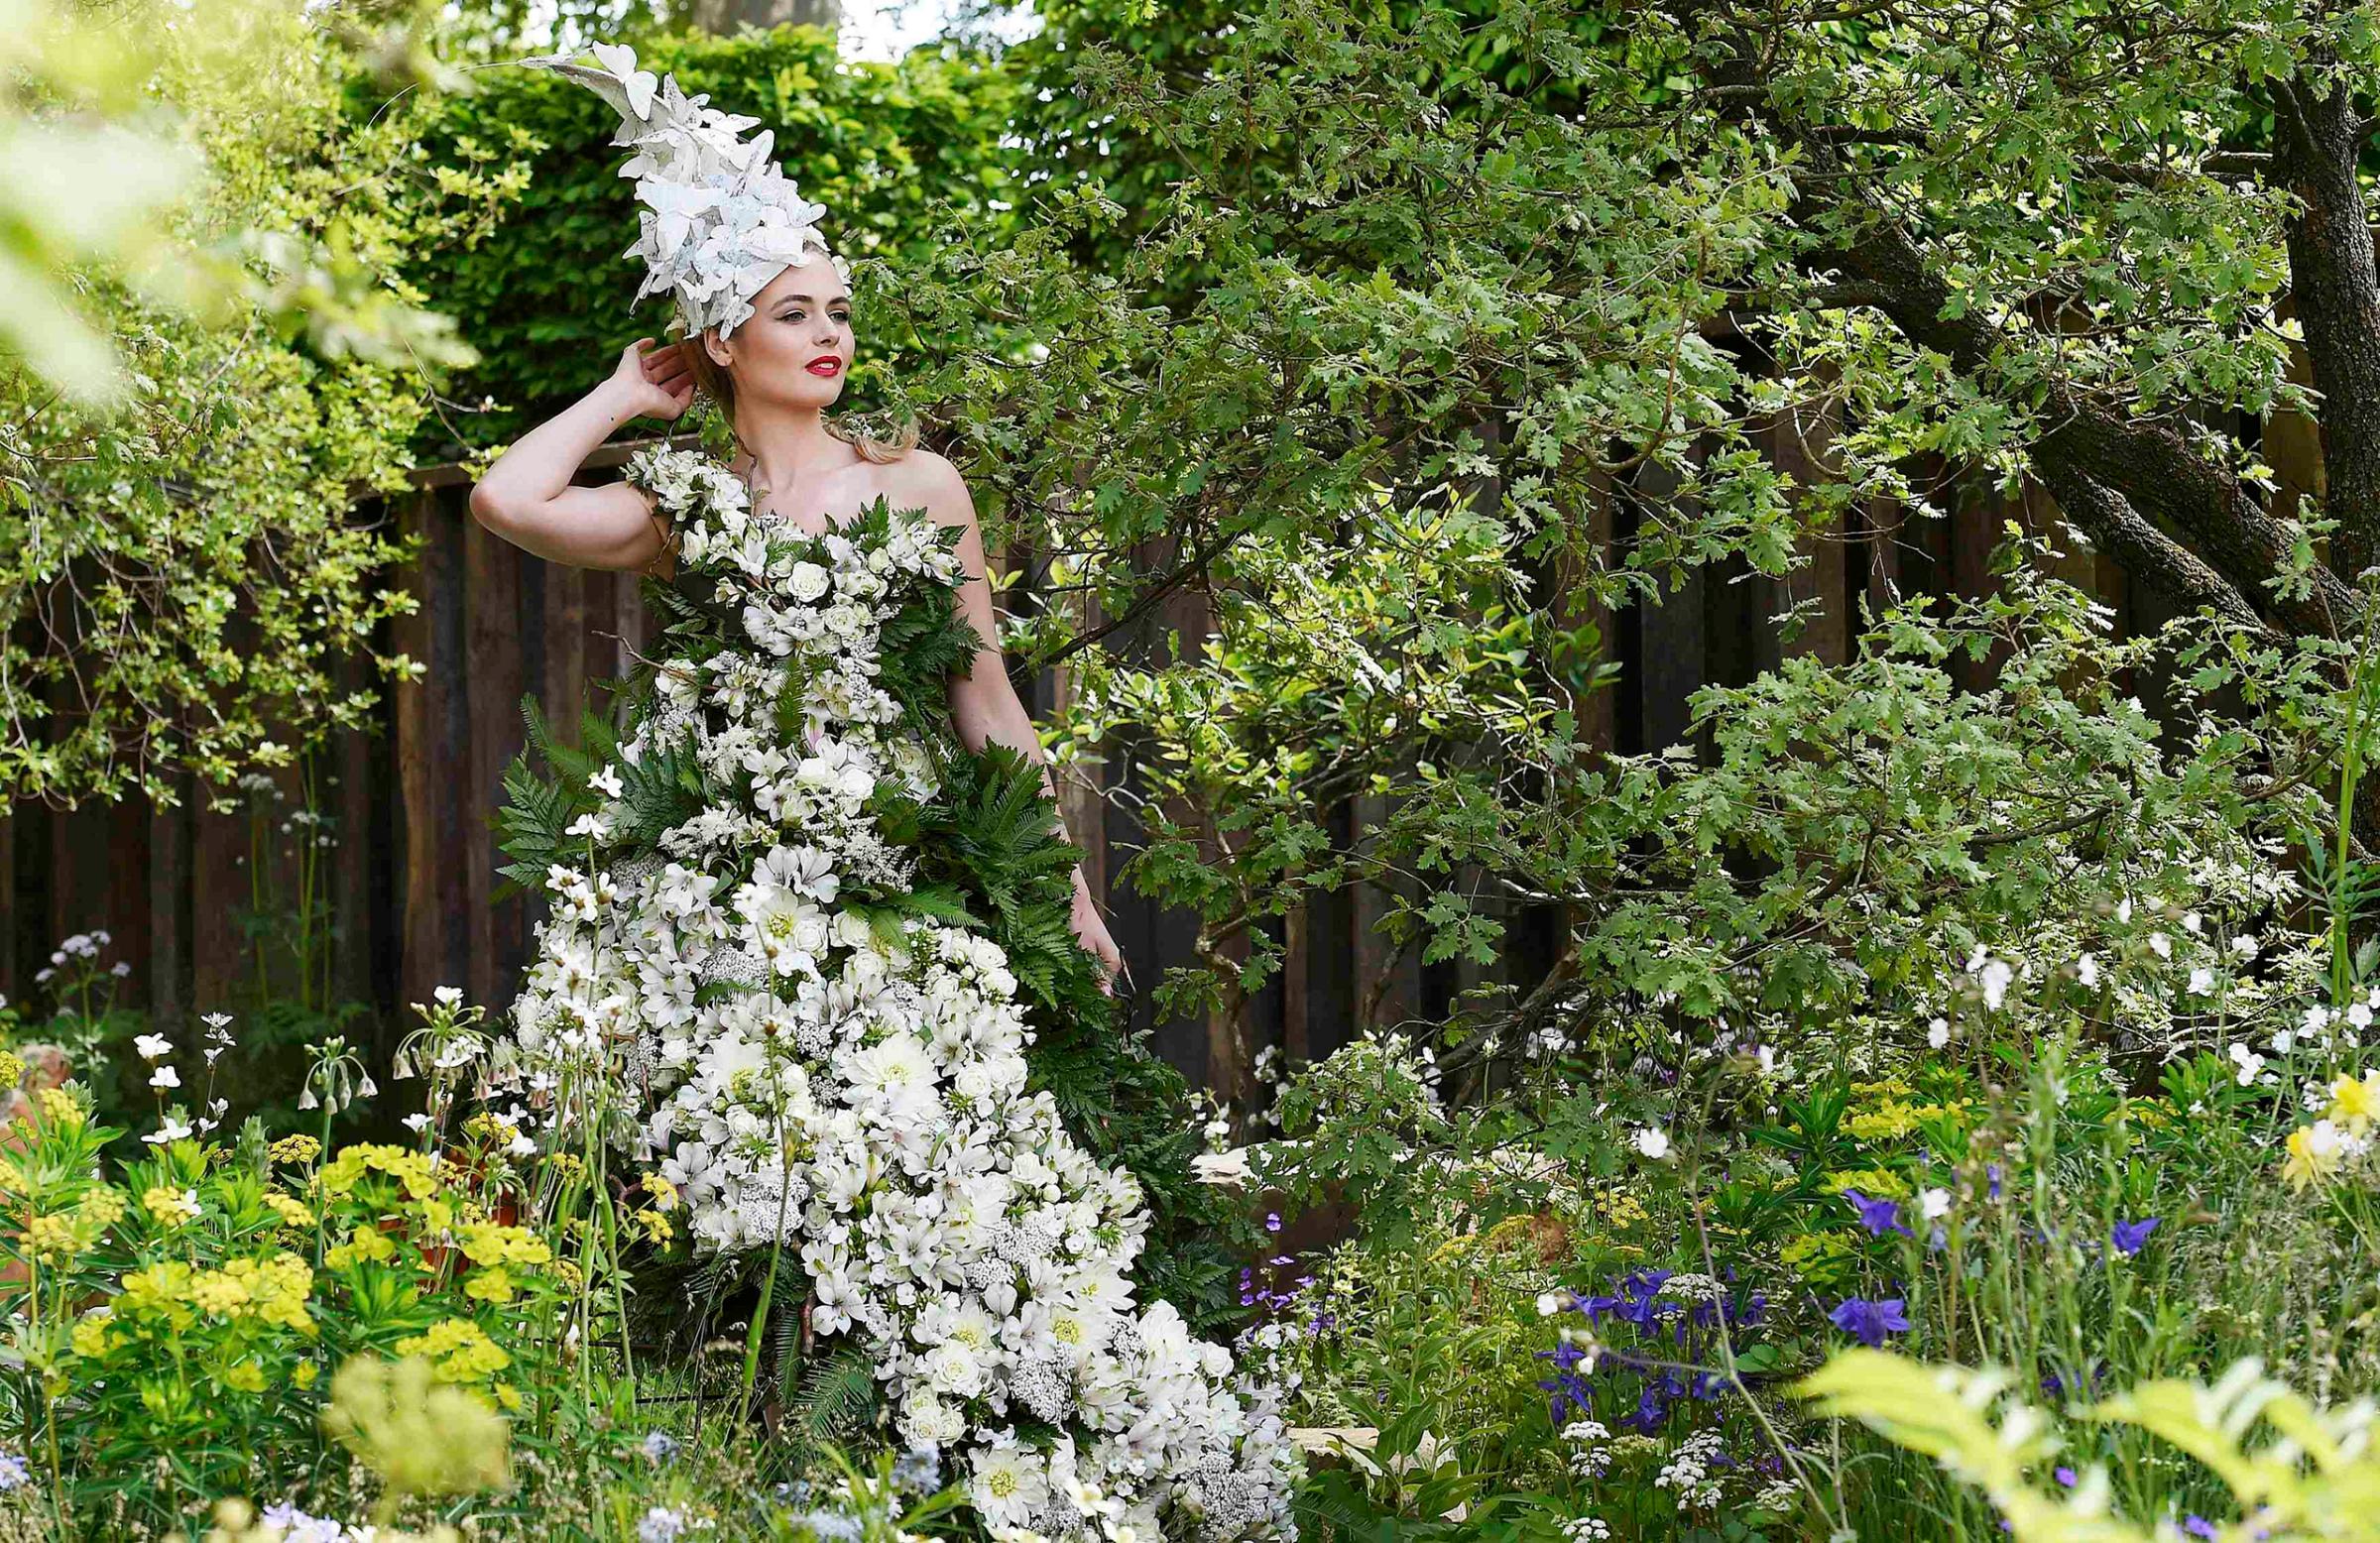 A model poses in a floral dress at the Chelsea Flower Show in London, Britain